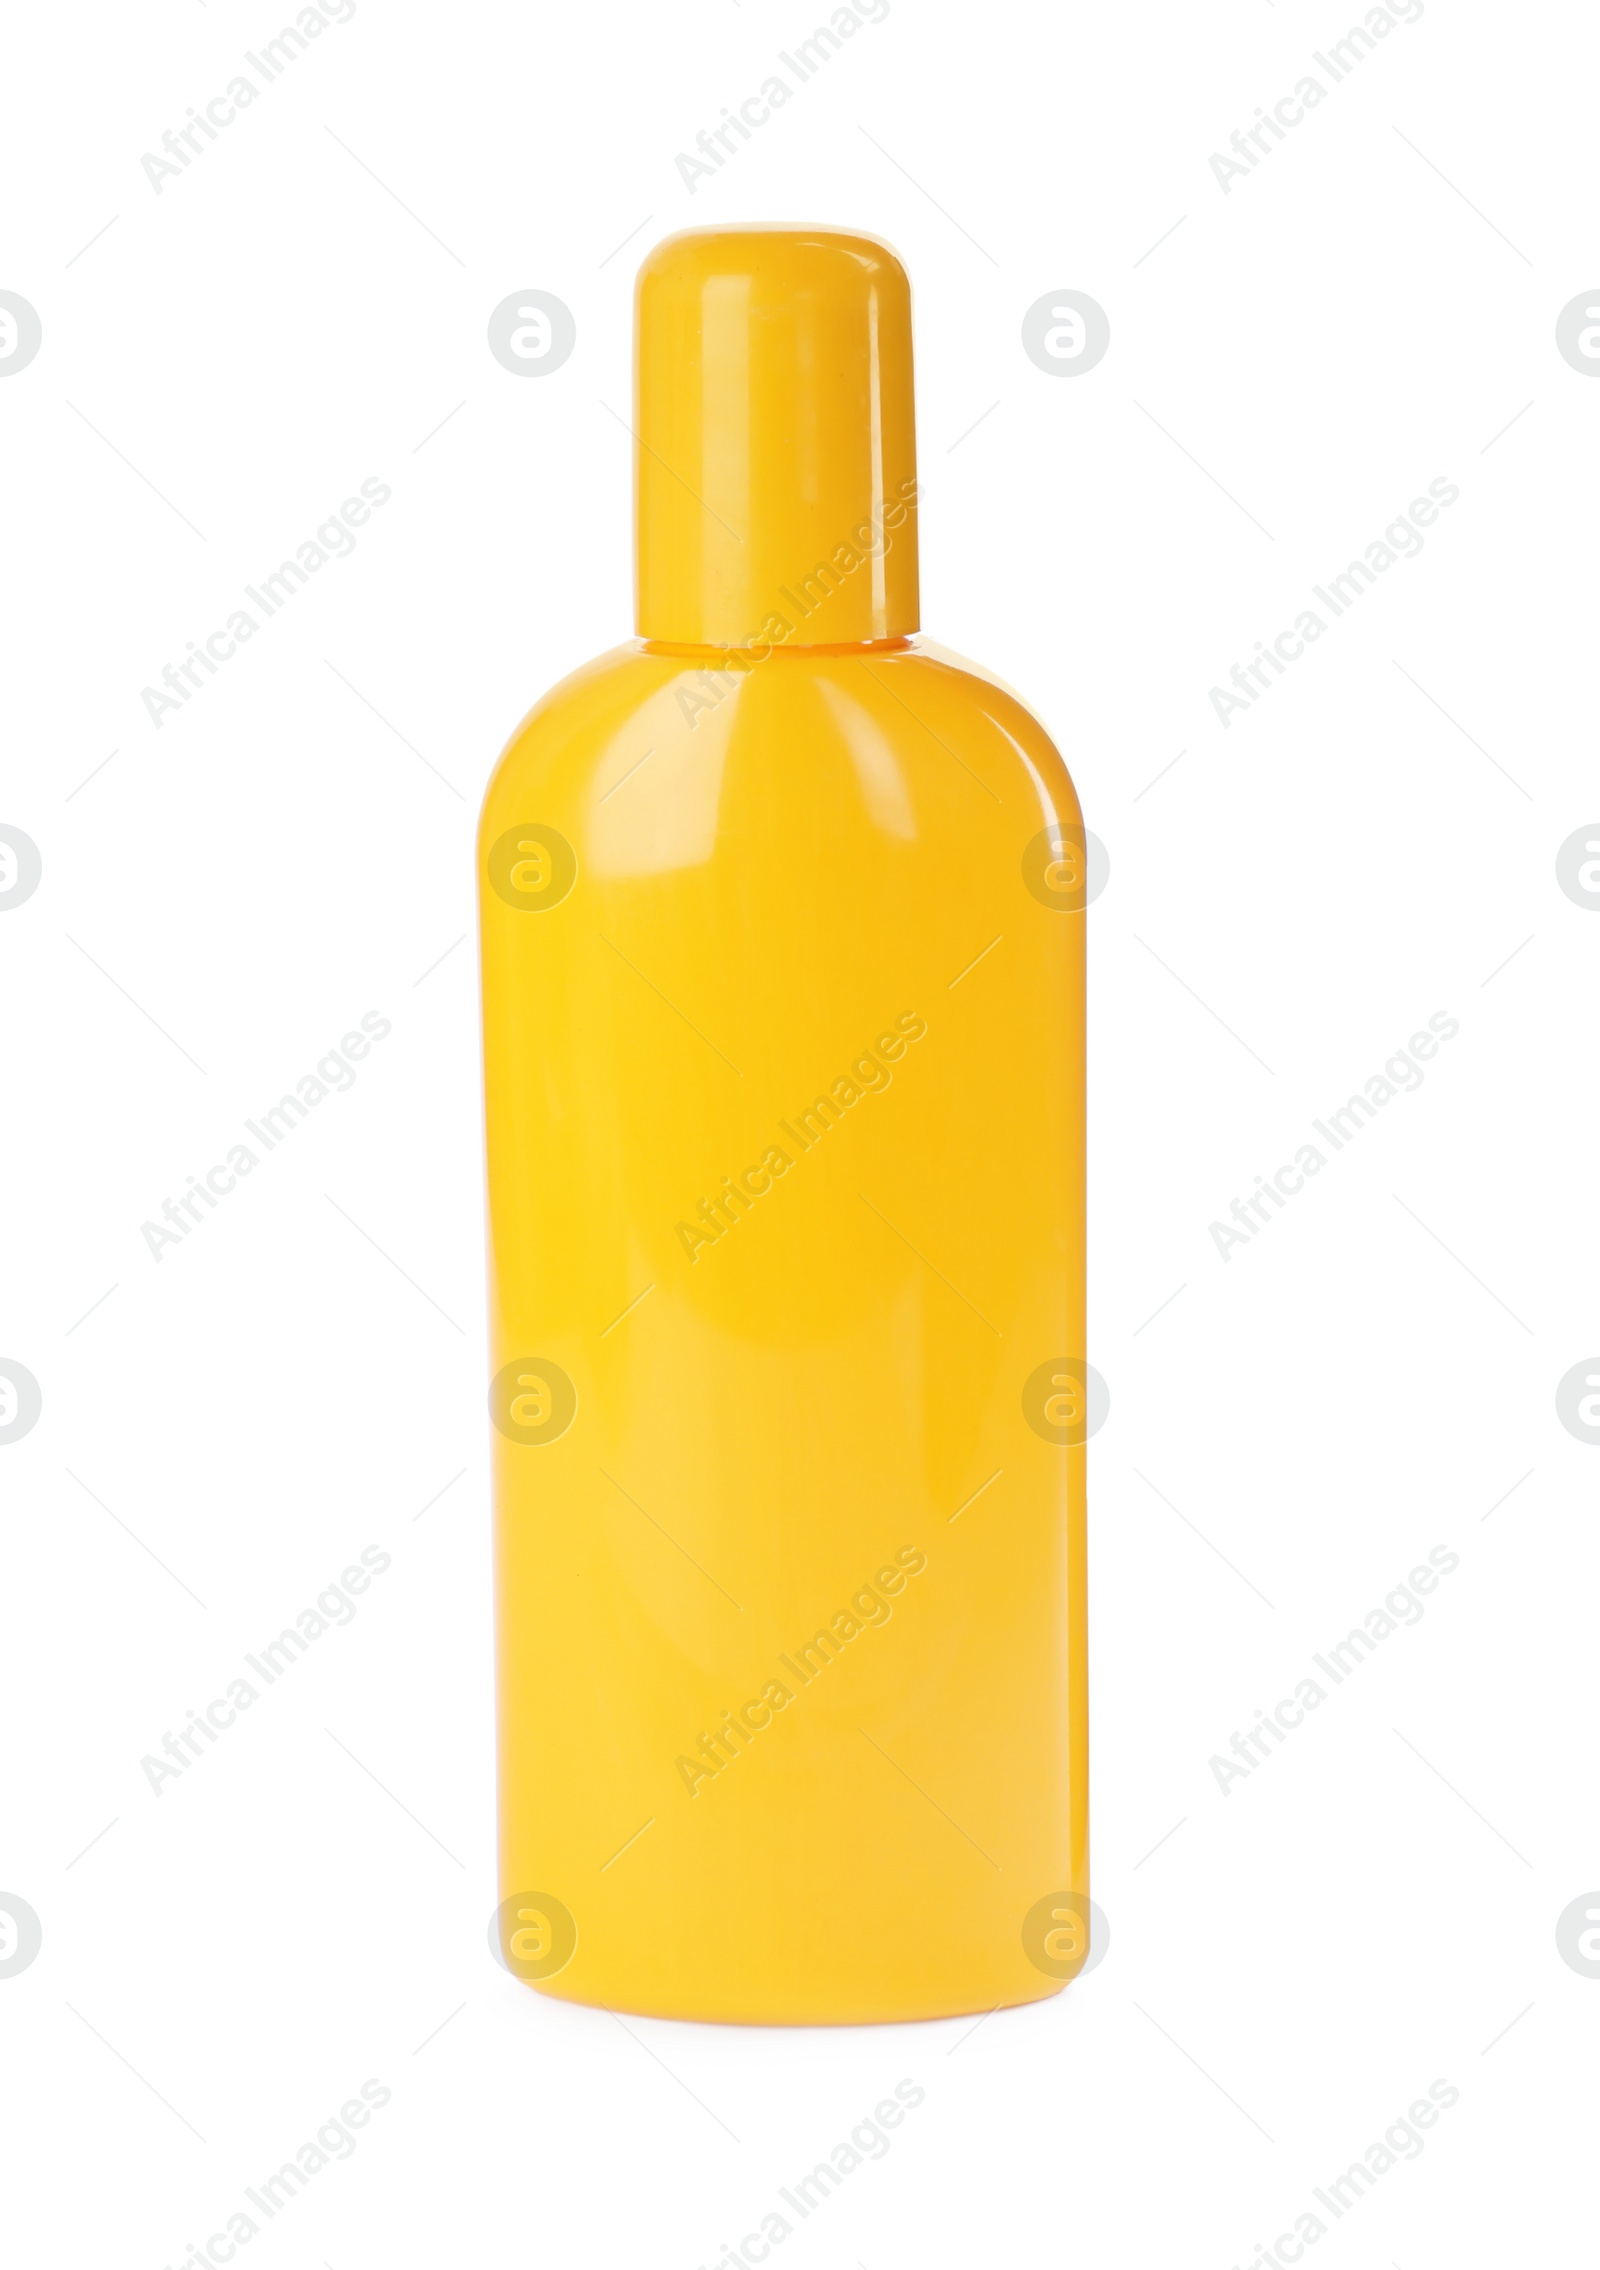 Photo of Bottle with sun protection lotion isolated on white